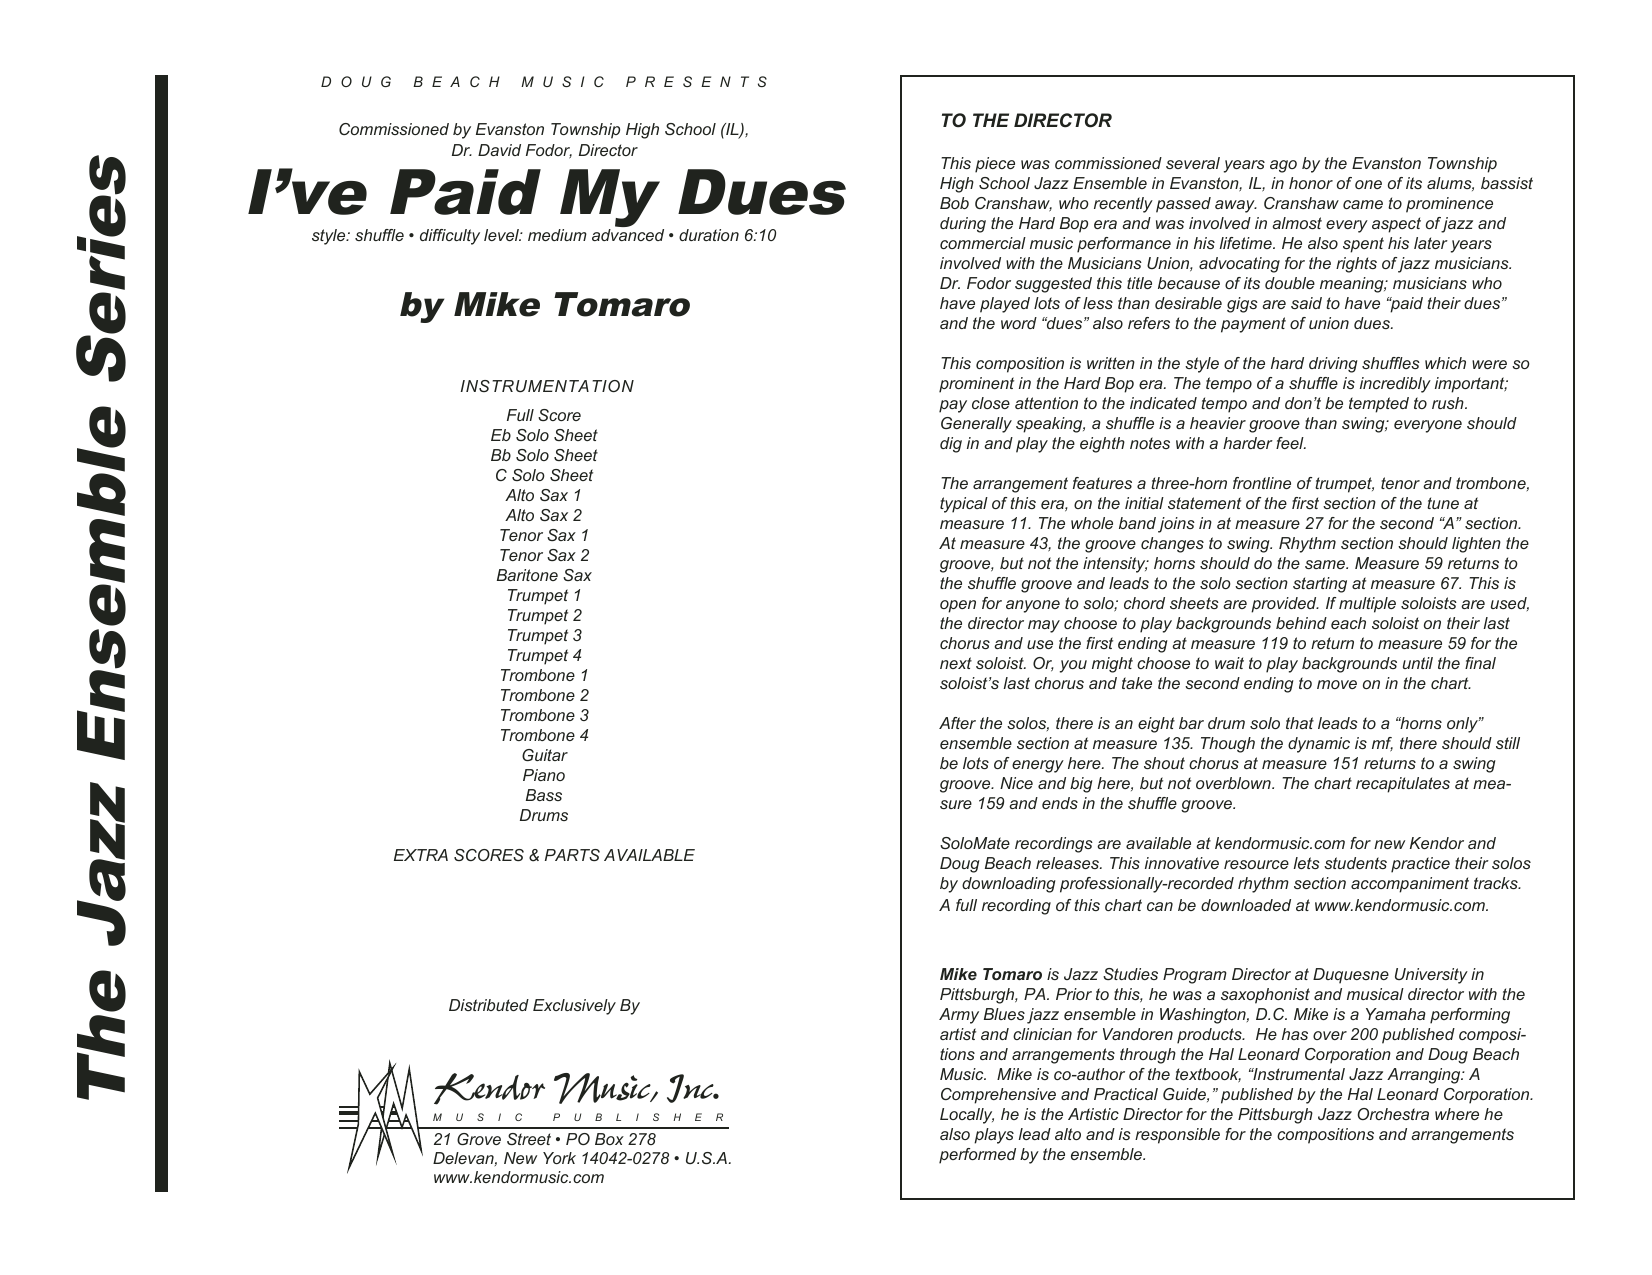 Download Mike Tomaro I've Paid My Dues - Full Score Sheet Music